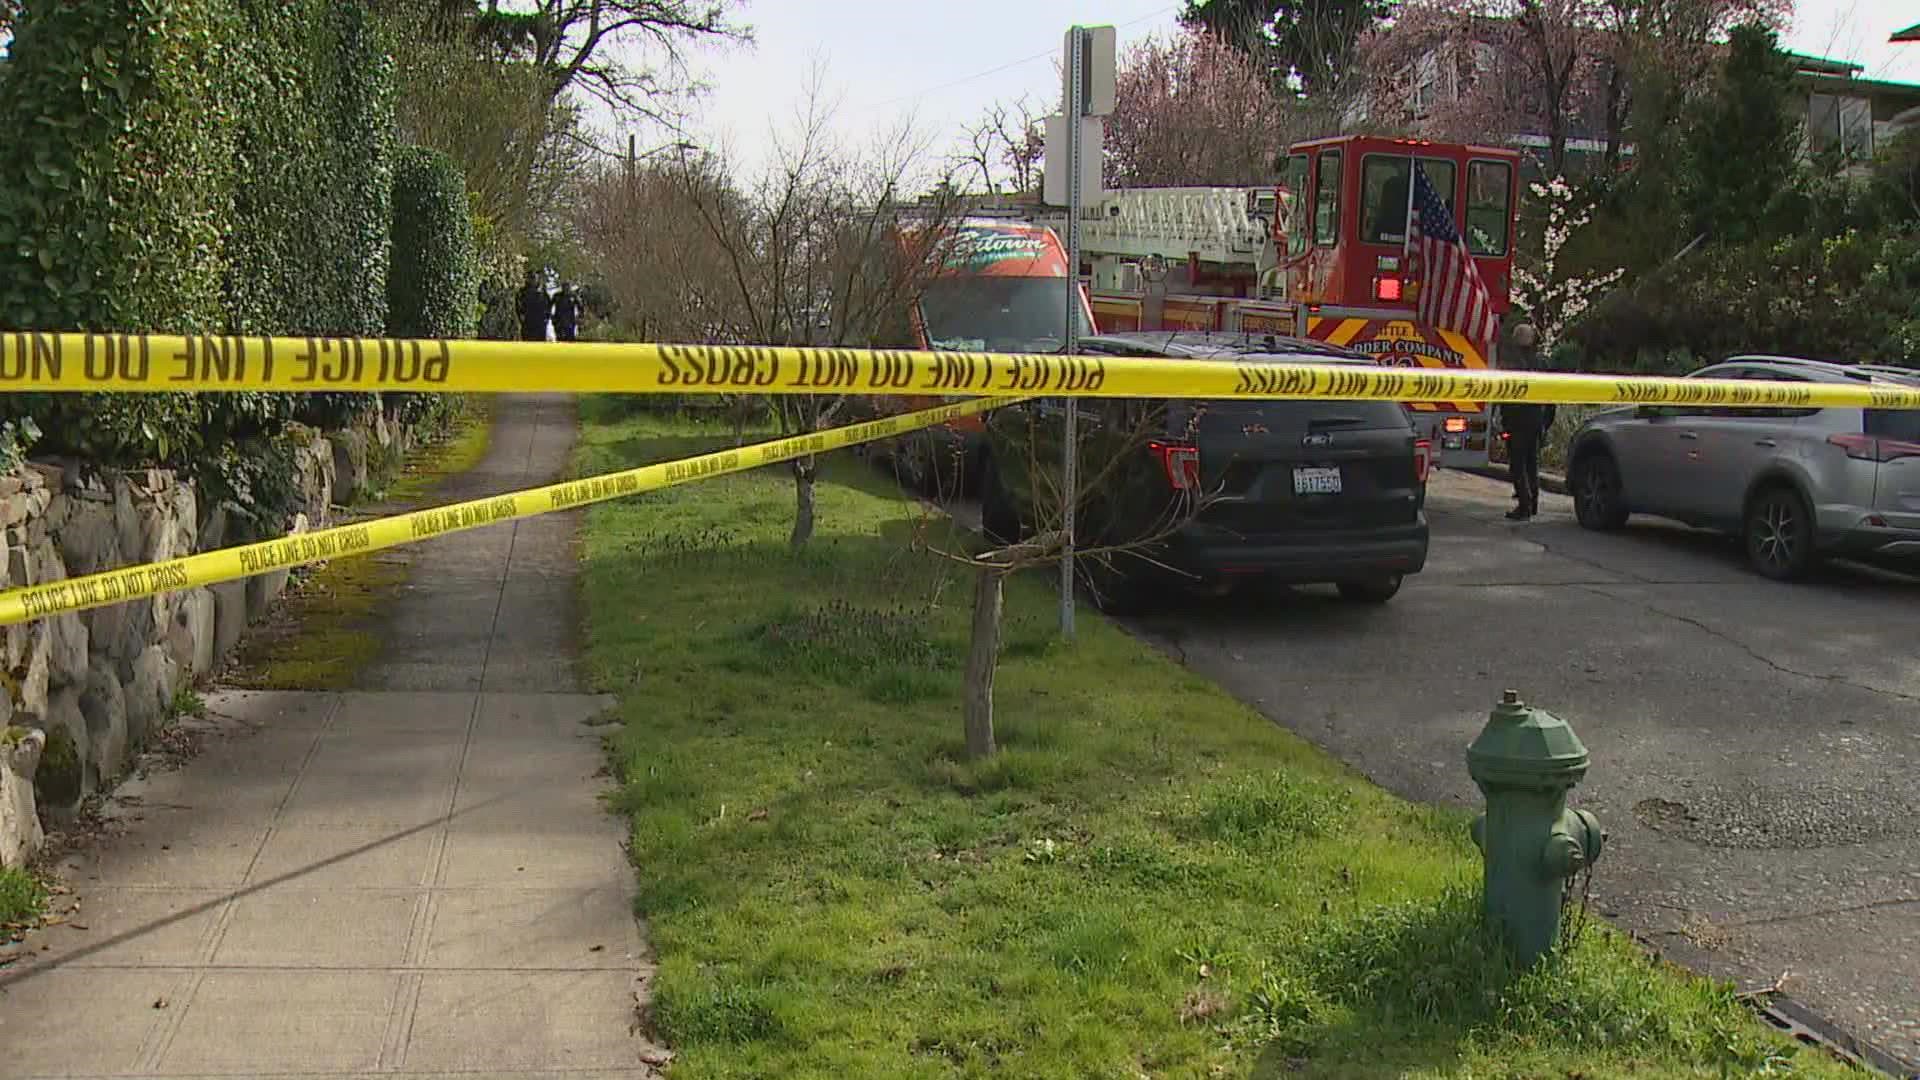 One person was critically injured and another died in a shooting in Columbia City Thursday, according to the Seattle Police Department.